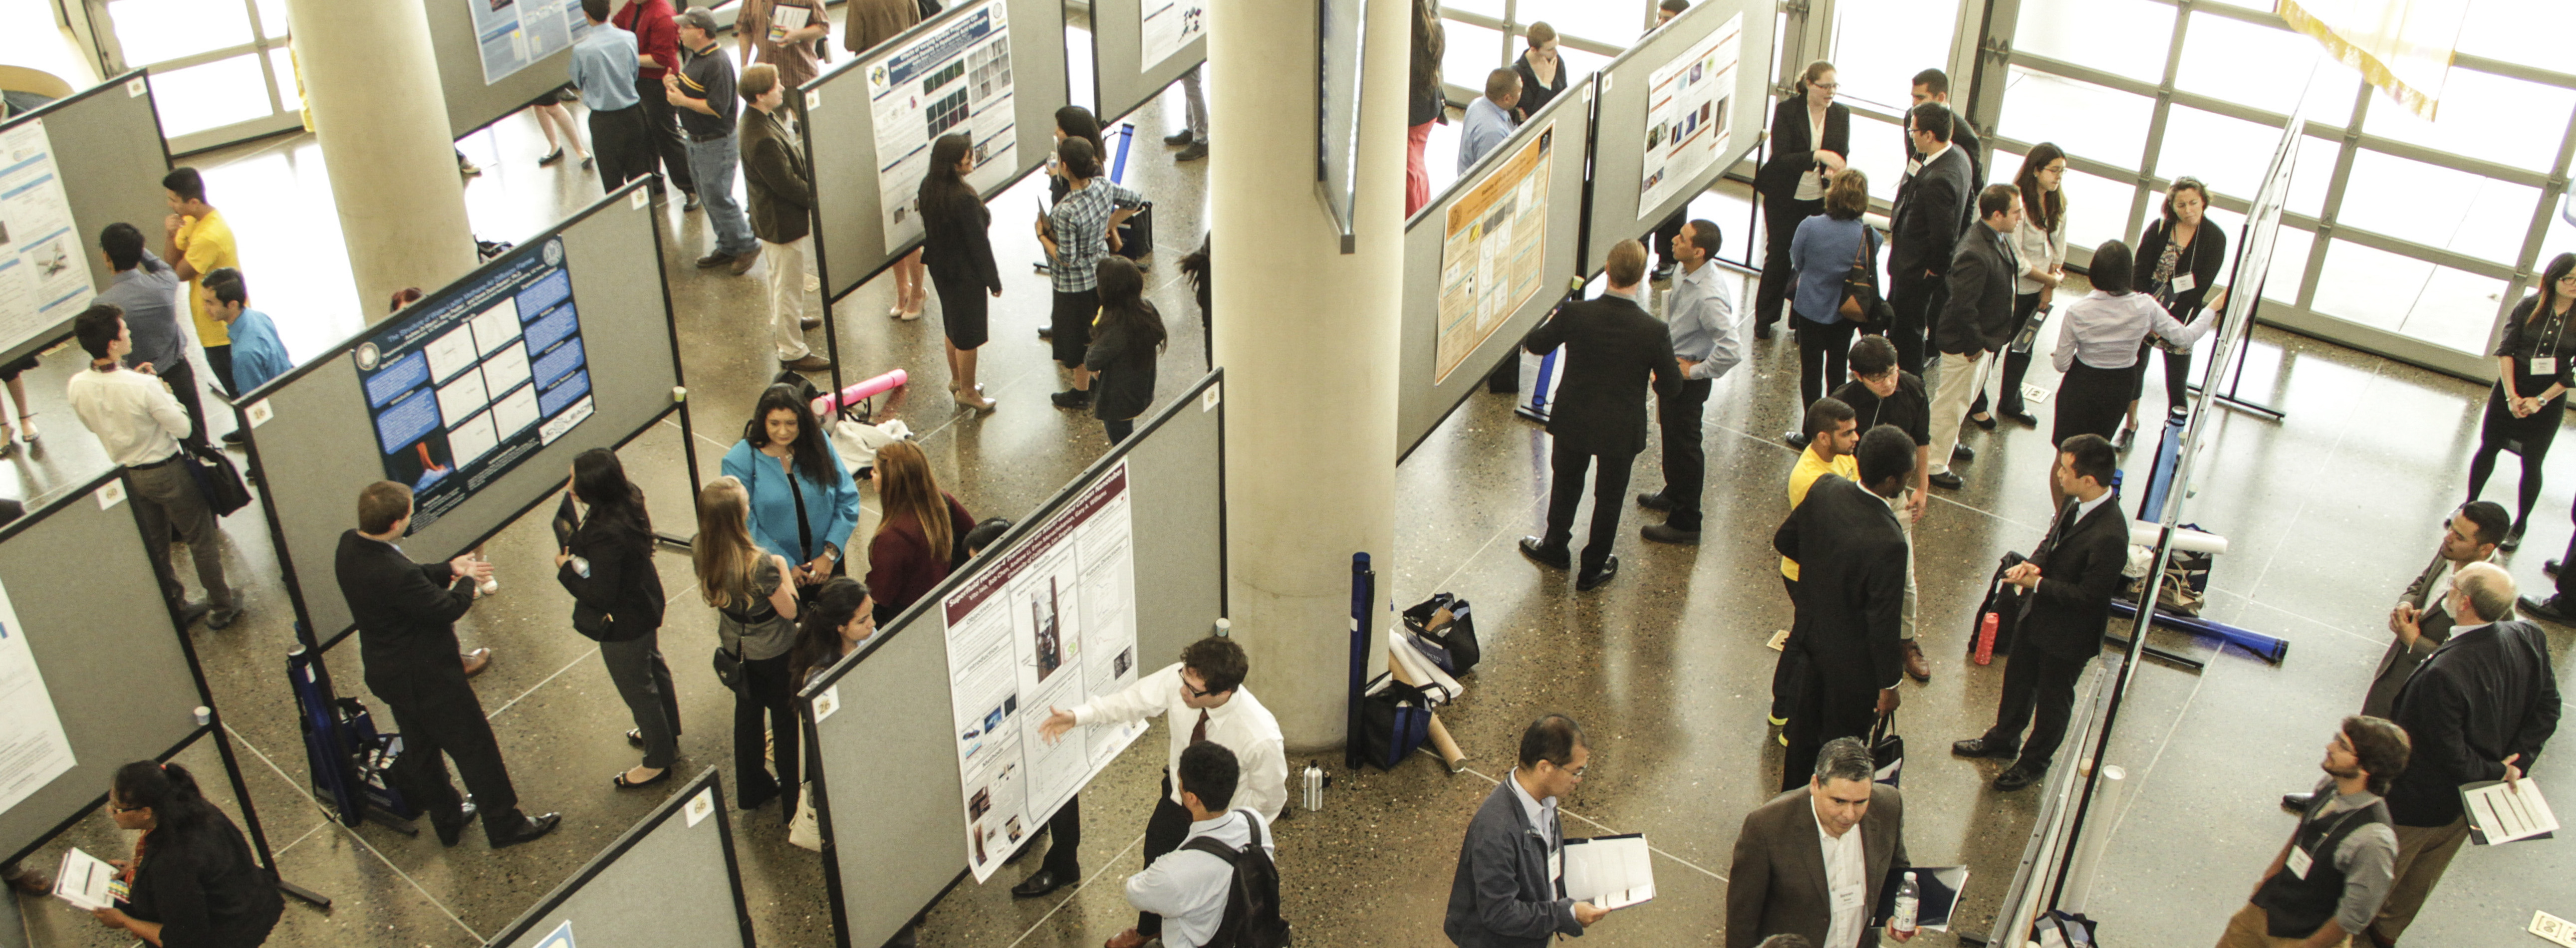 Scholars Poster Session during UROC's Annual Summer Research Symposium